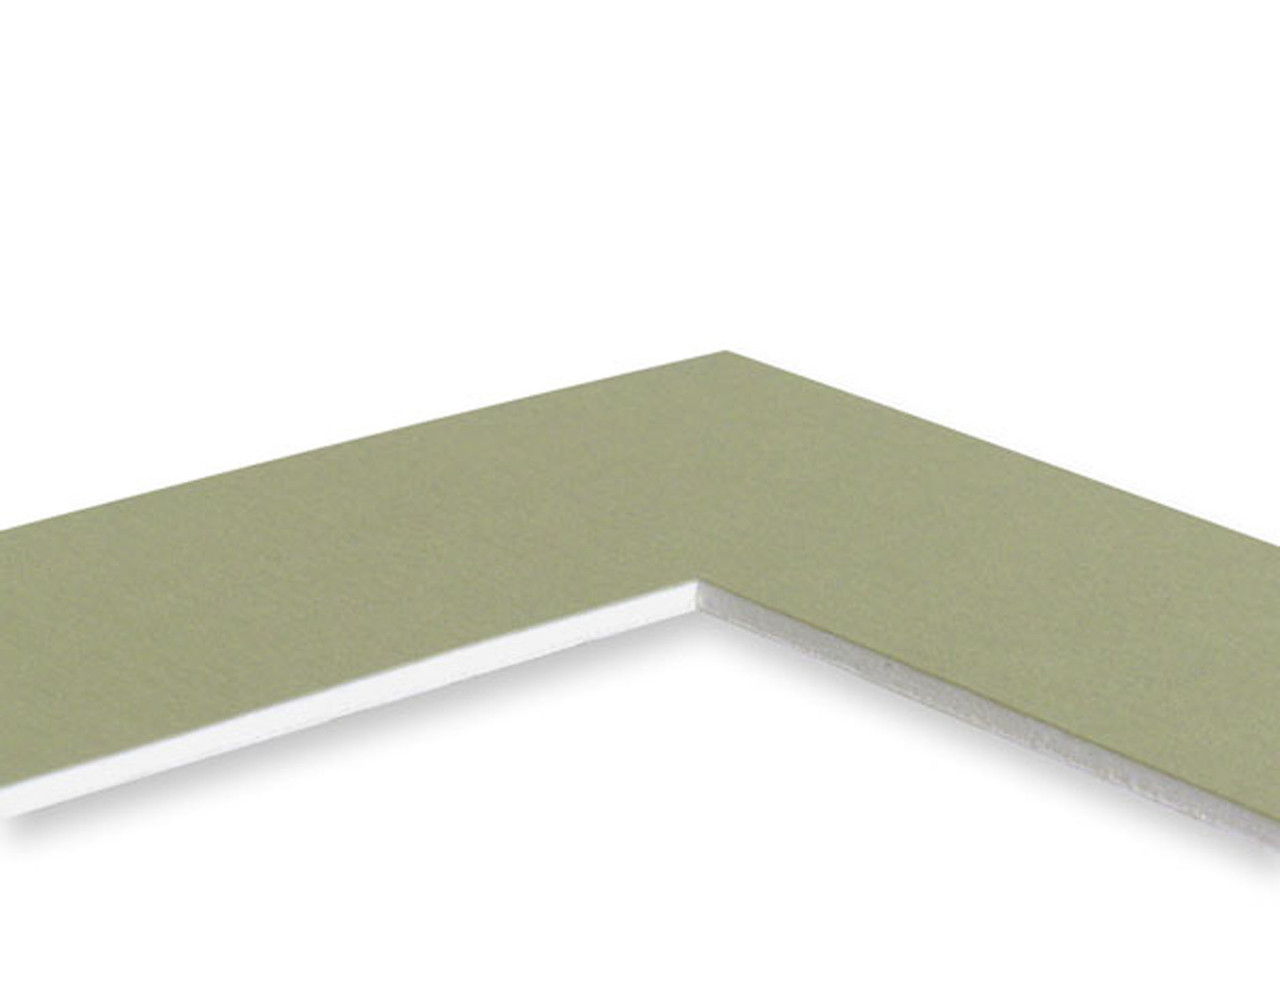 16x20 Single 25 Pack (Conservation) - includes mats, 1/8" Acid-Free Foamcore backing and sleeves!